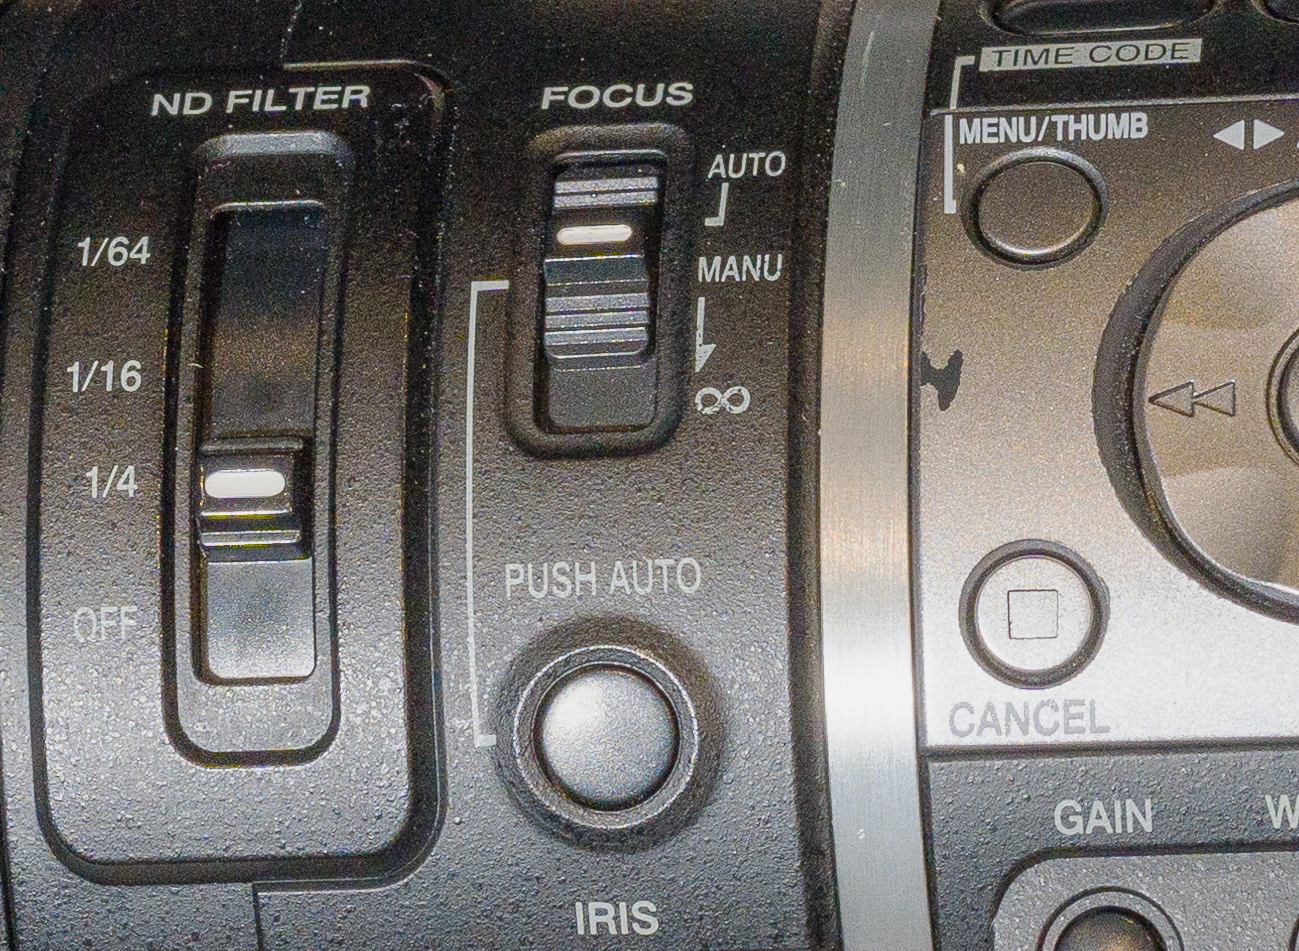 Focus functions on the side of a video camera.